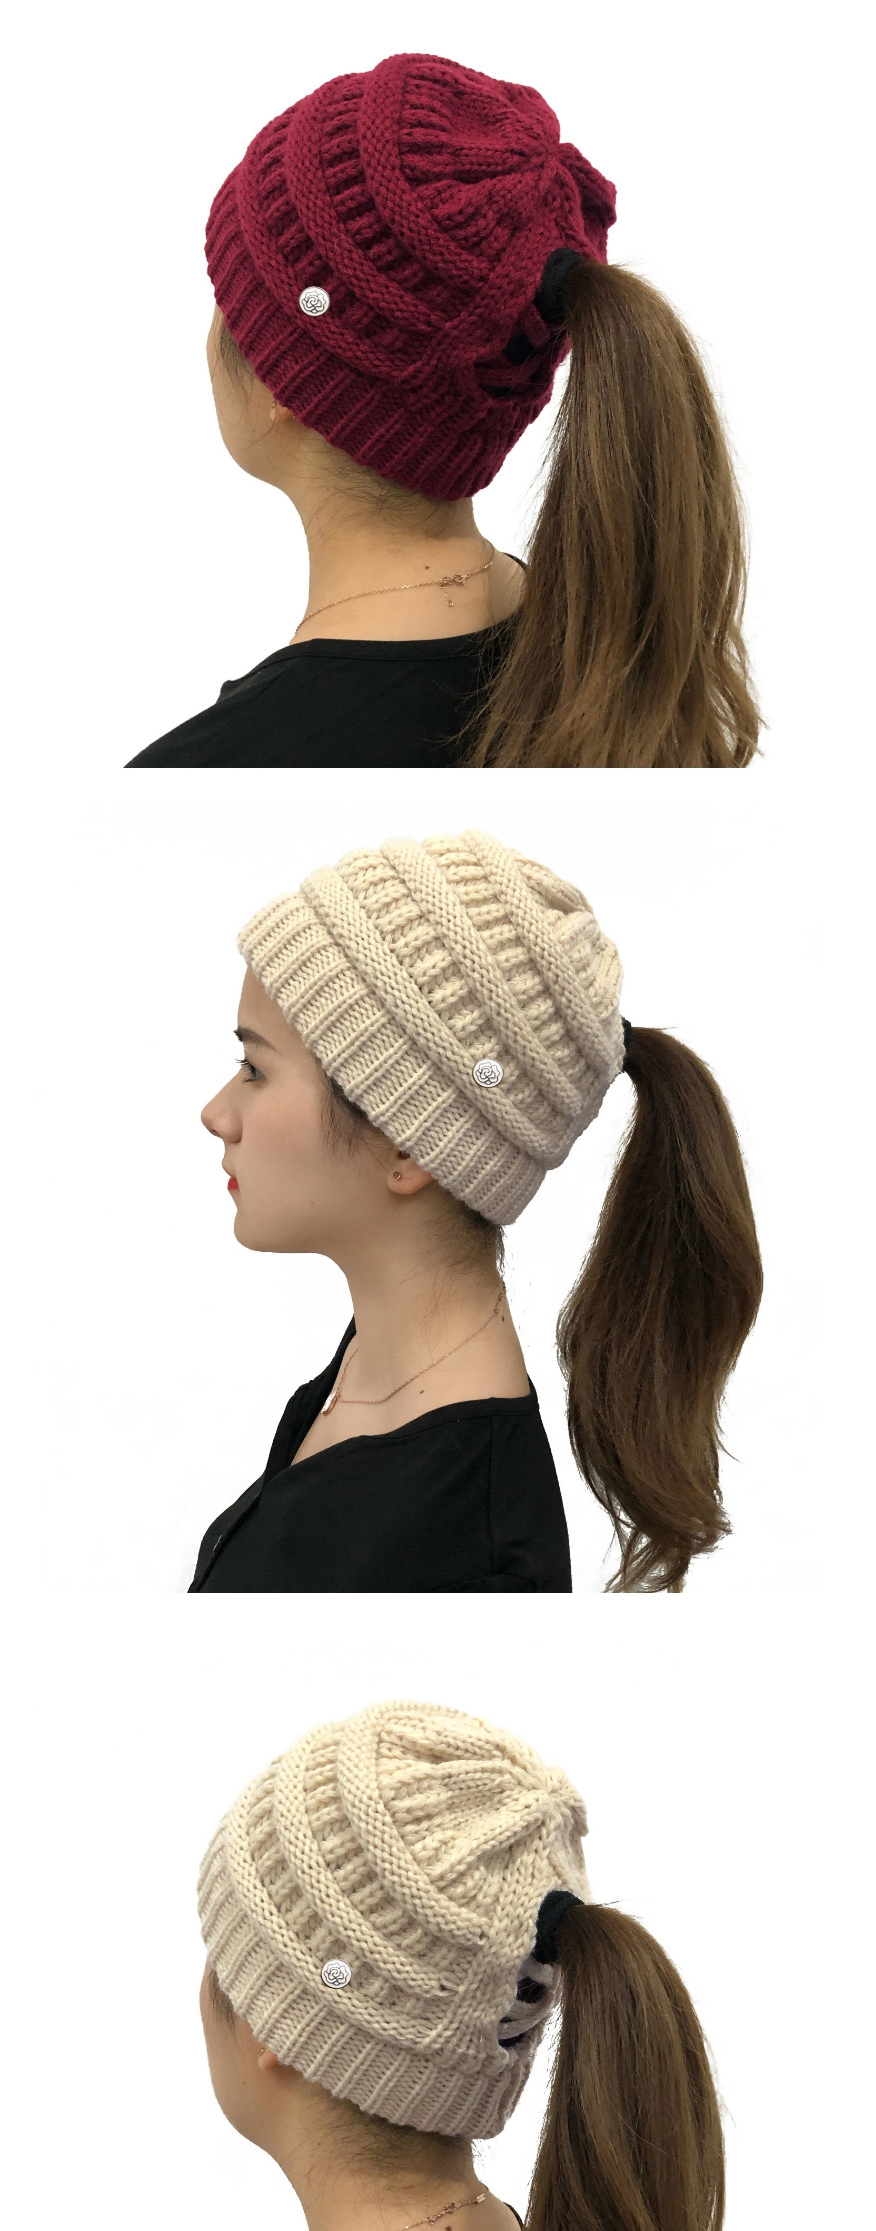 Fashion Black Flowers Button Detachable Cross-back Ponytail Knitted Hat,Knitting Wool Hats